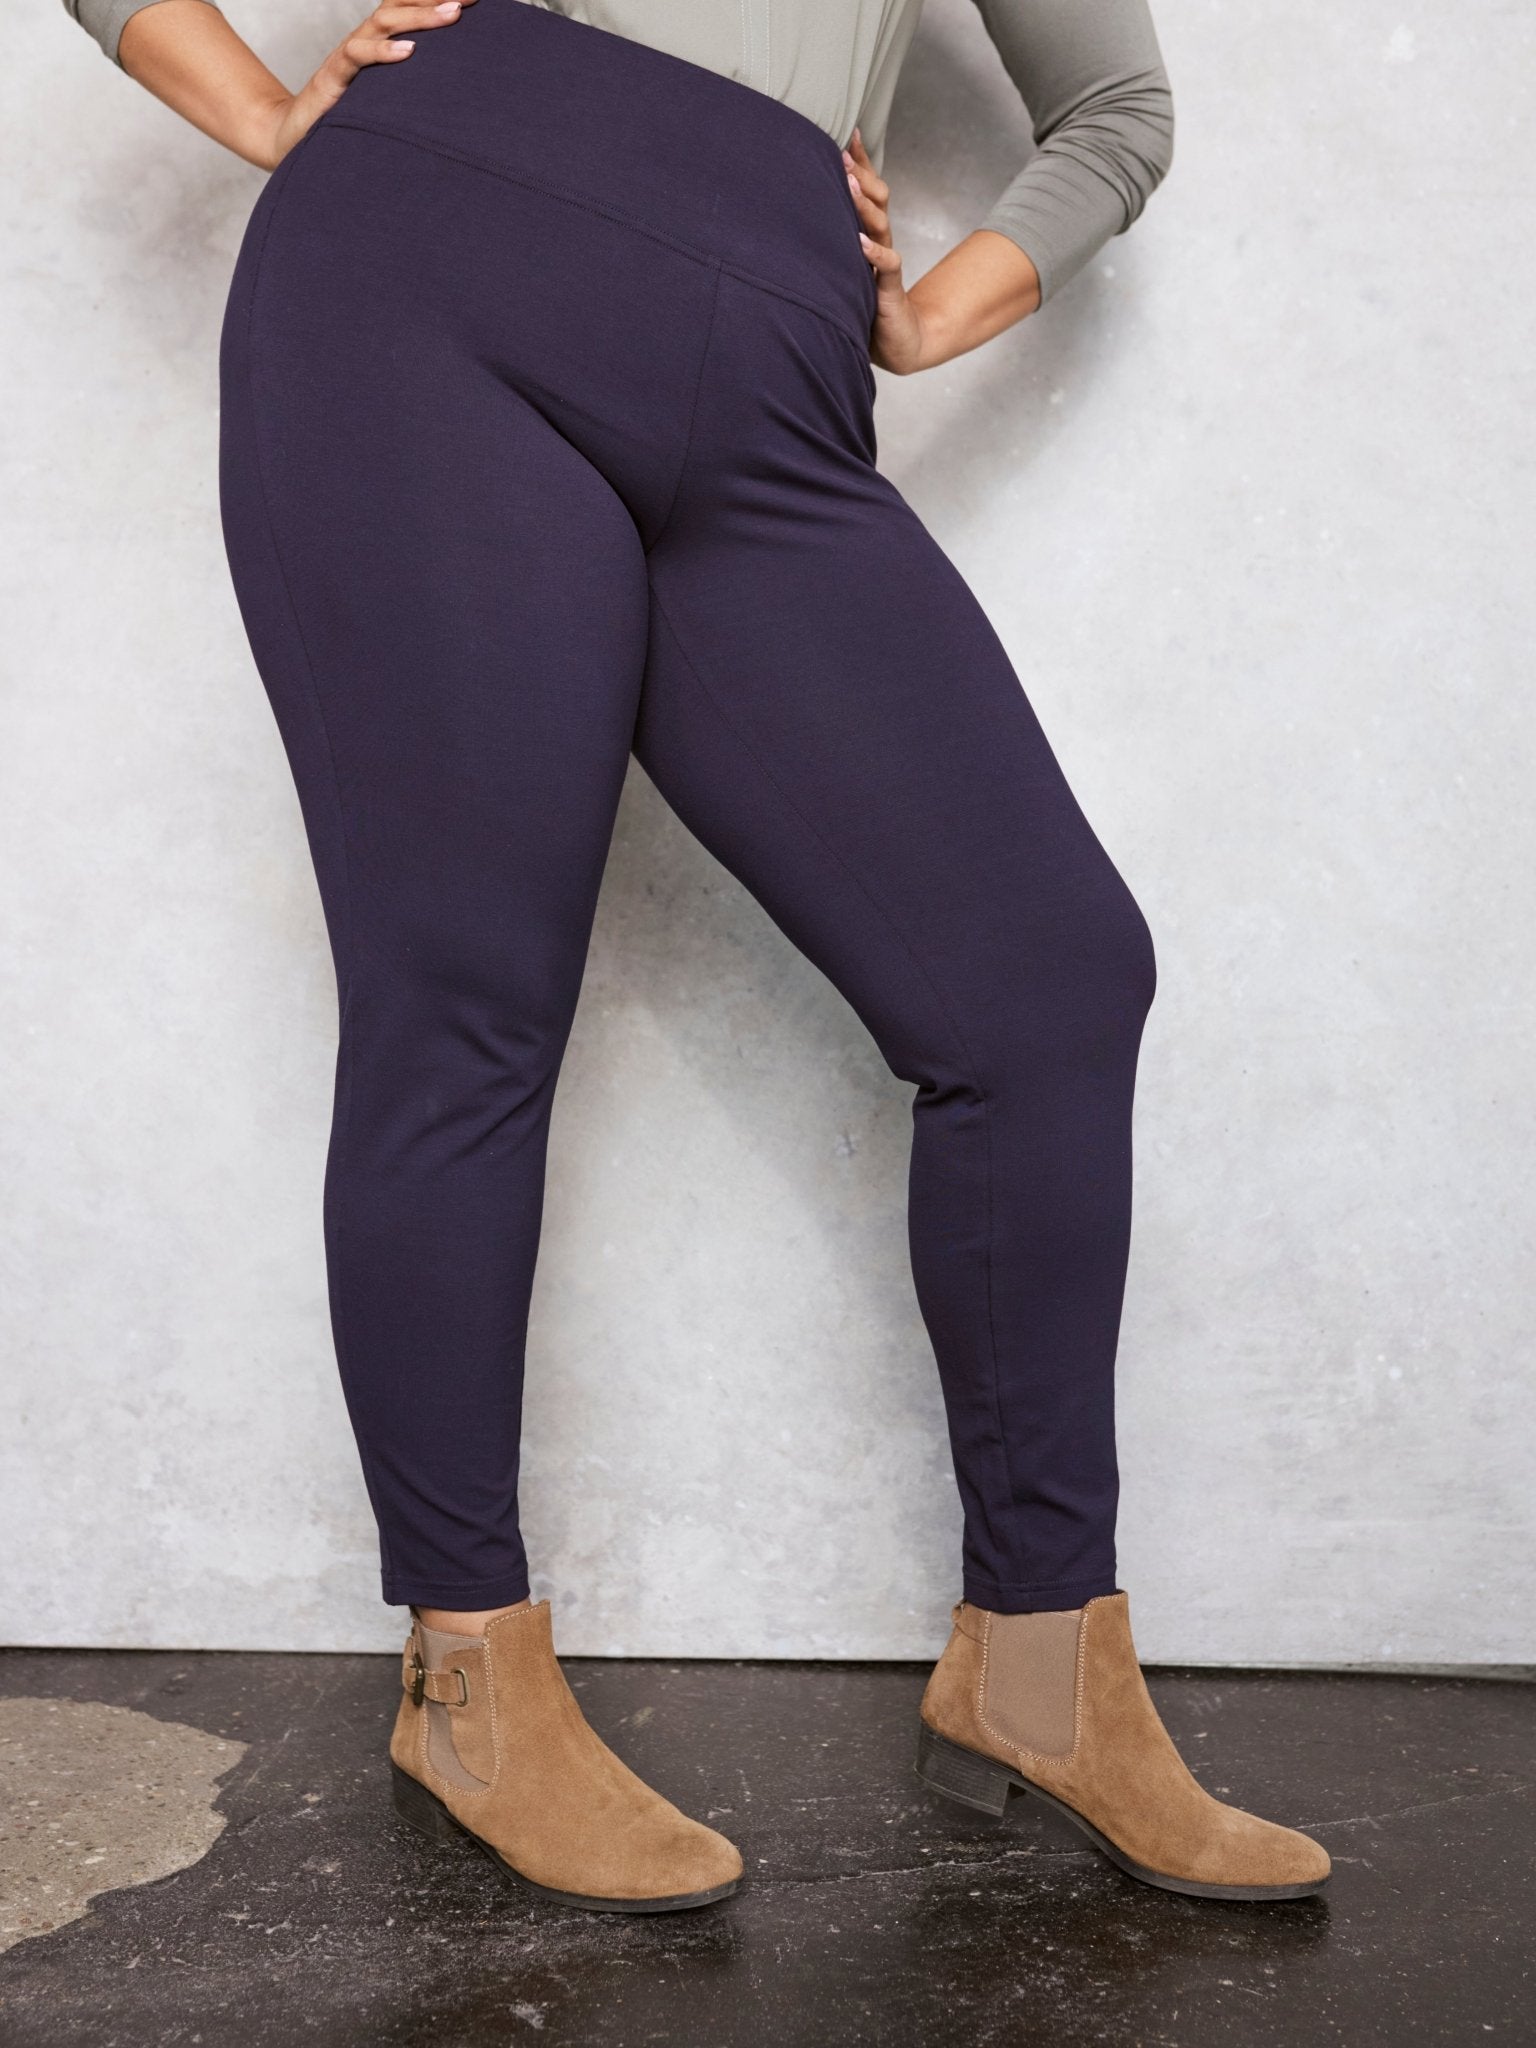 Control Top Leggings One Size Long - mulberrycottage